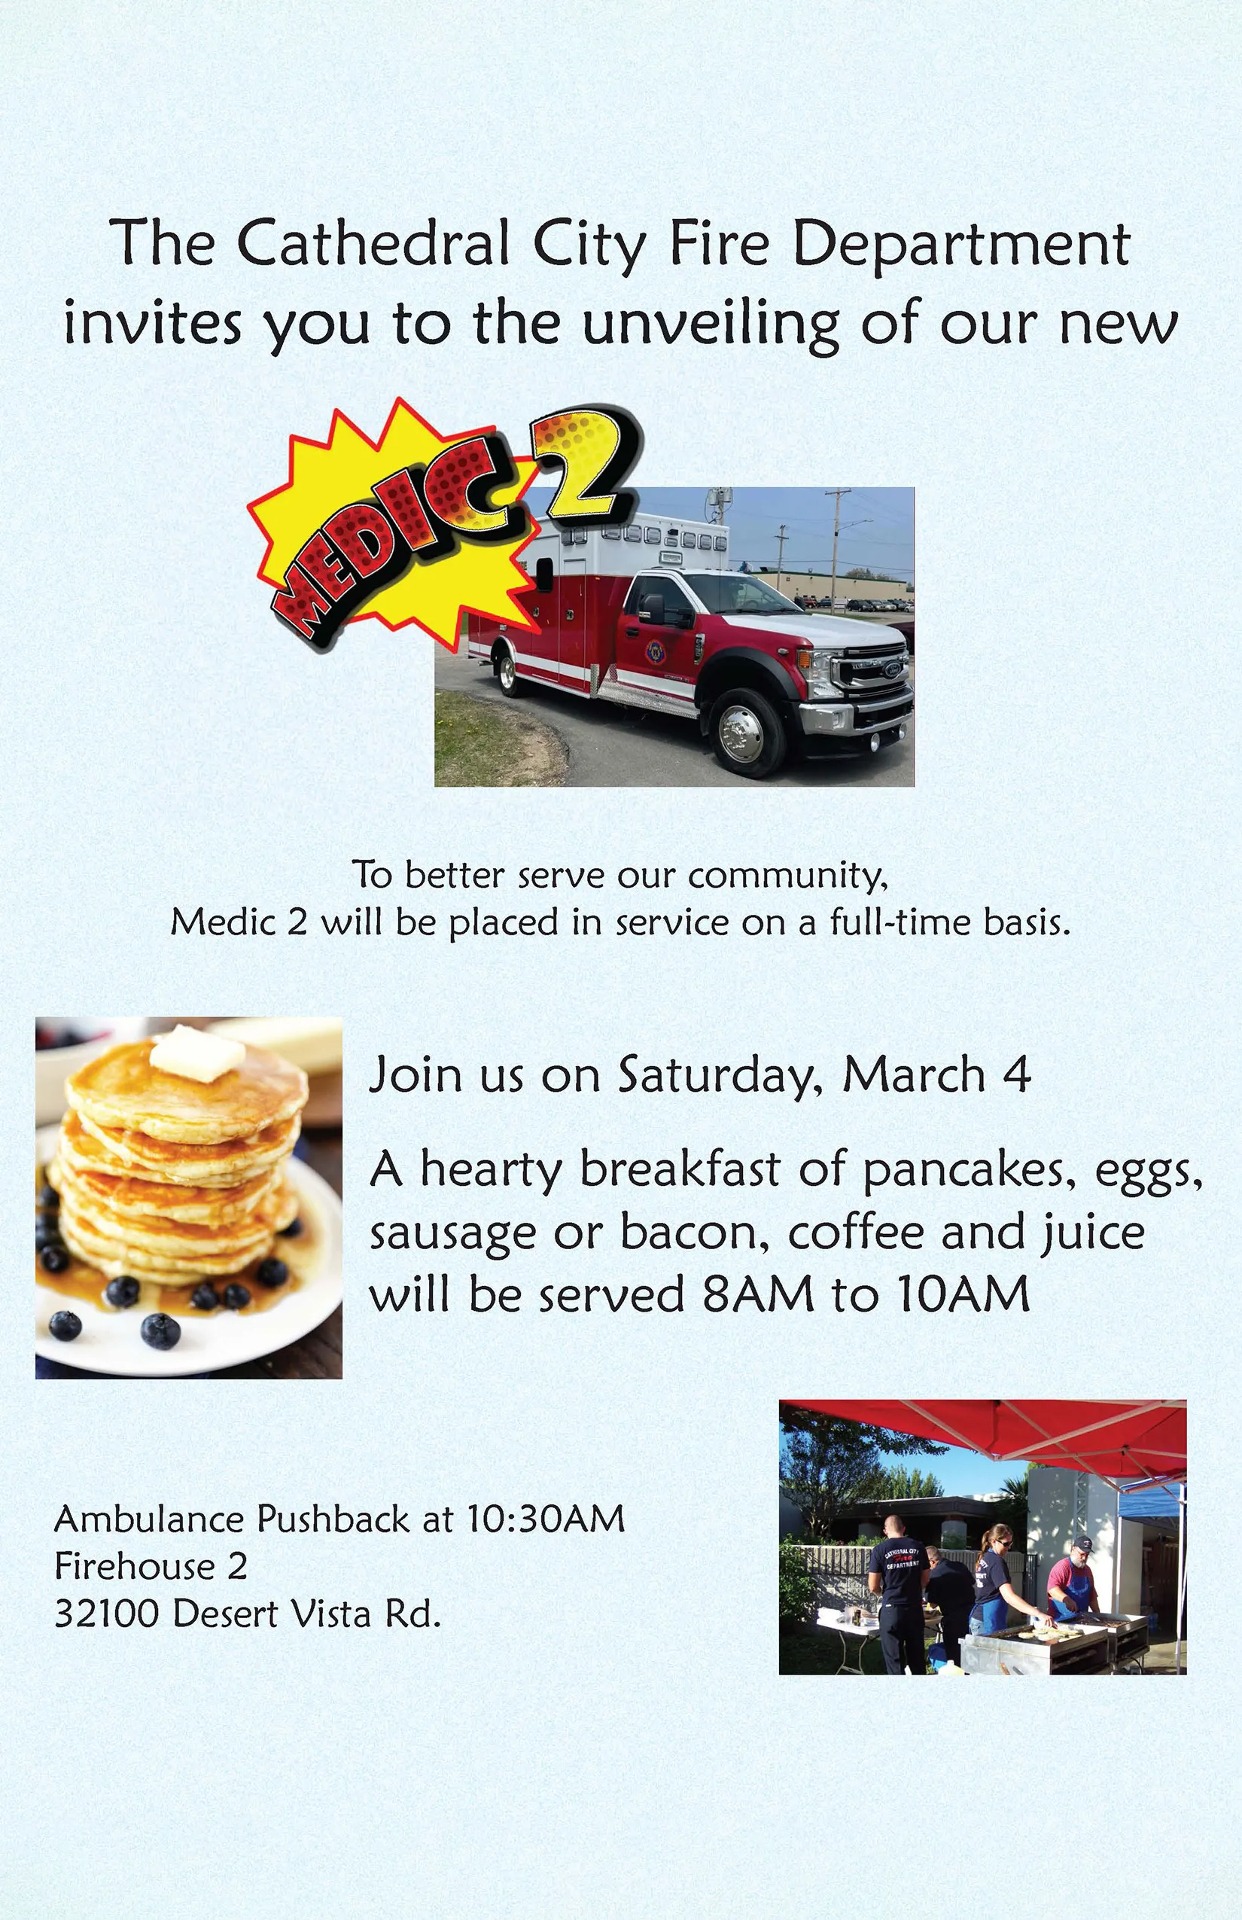 Join Cathedral City Fire Department for Breakfast Celebrating New Ambulance on Sat. March 4, 2023